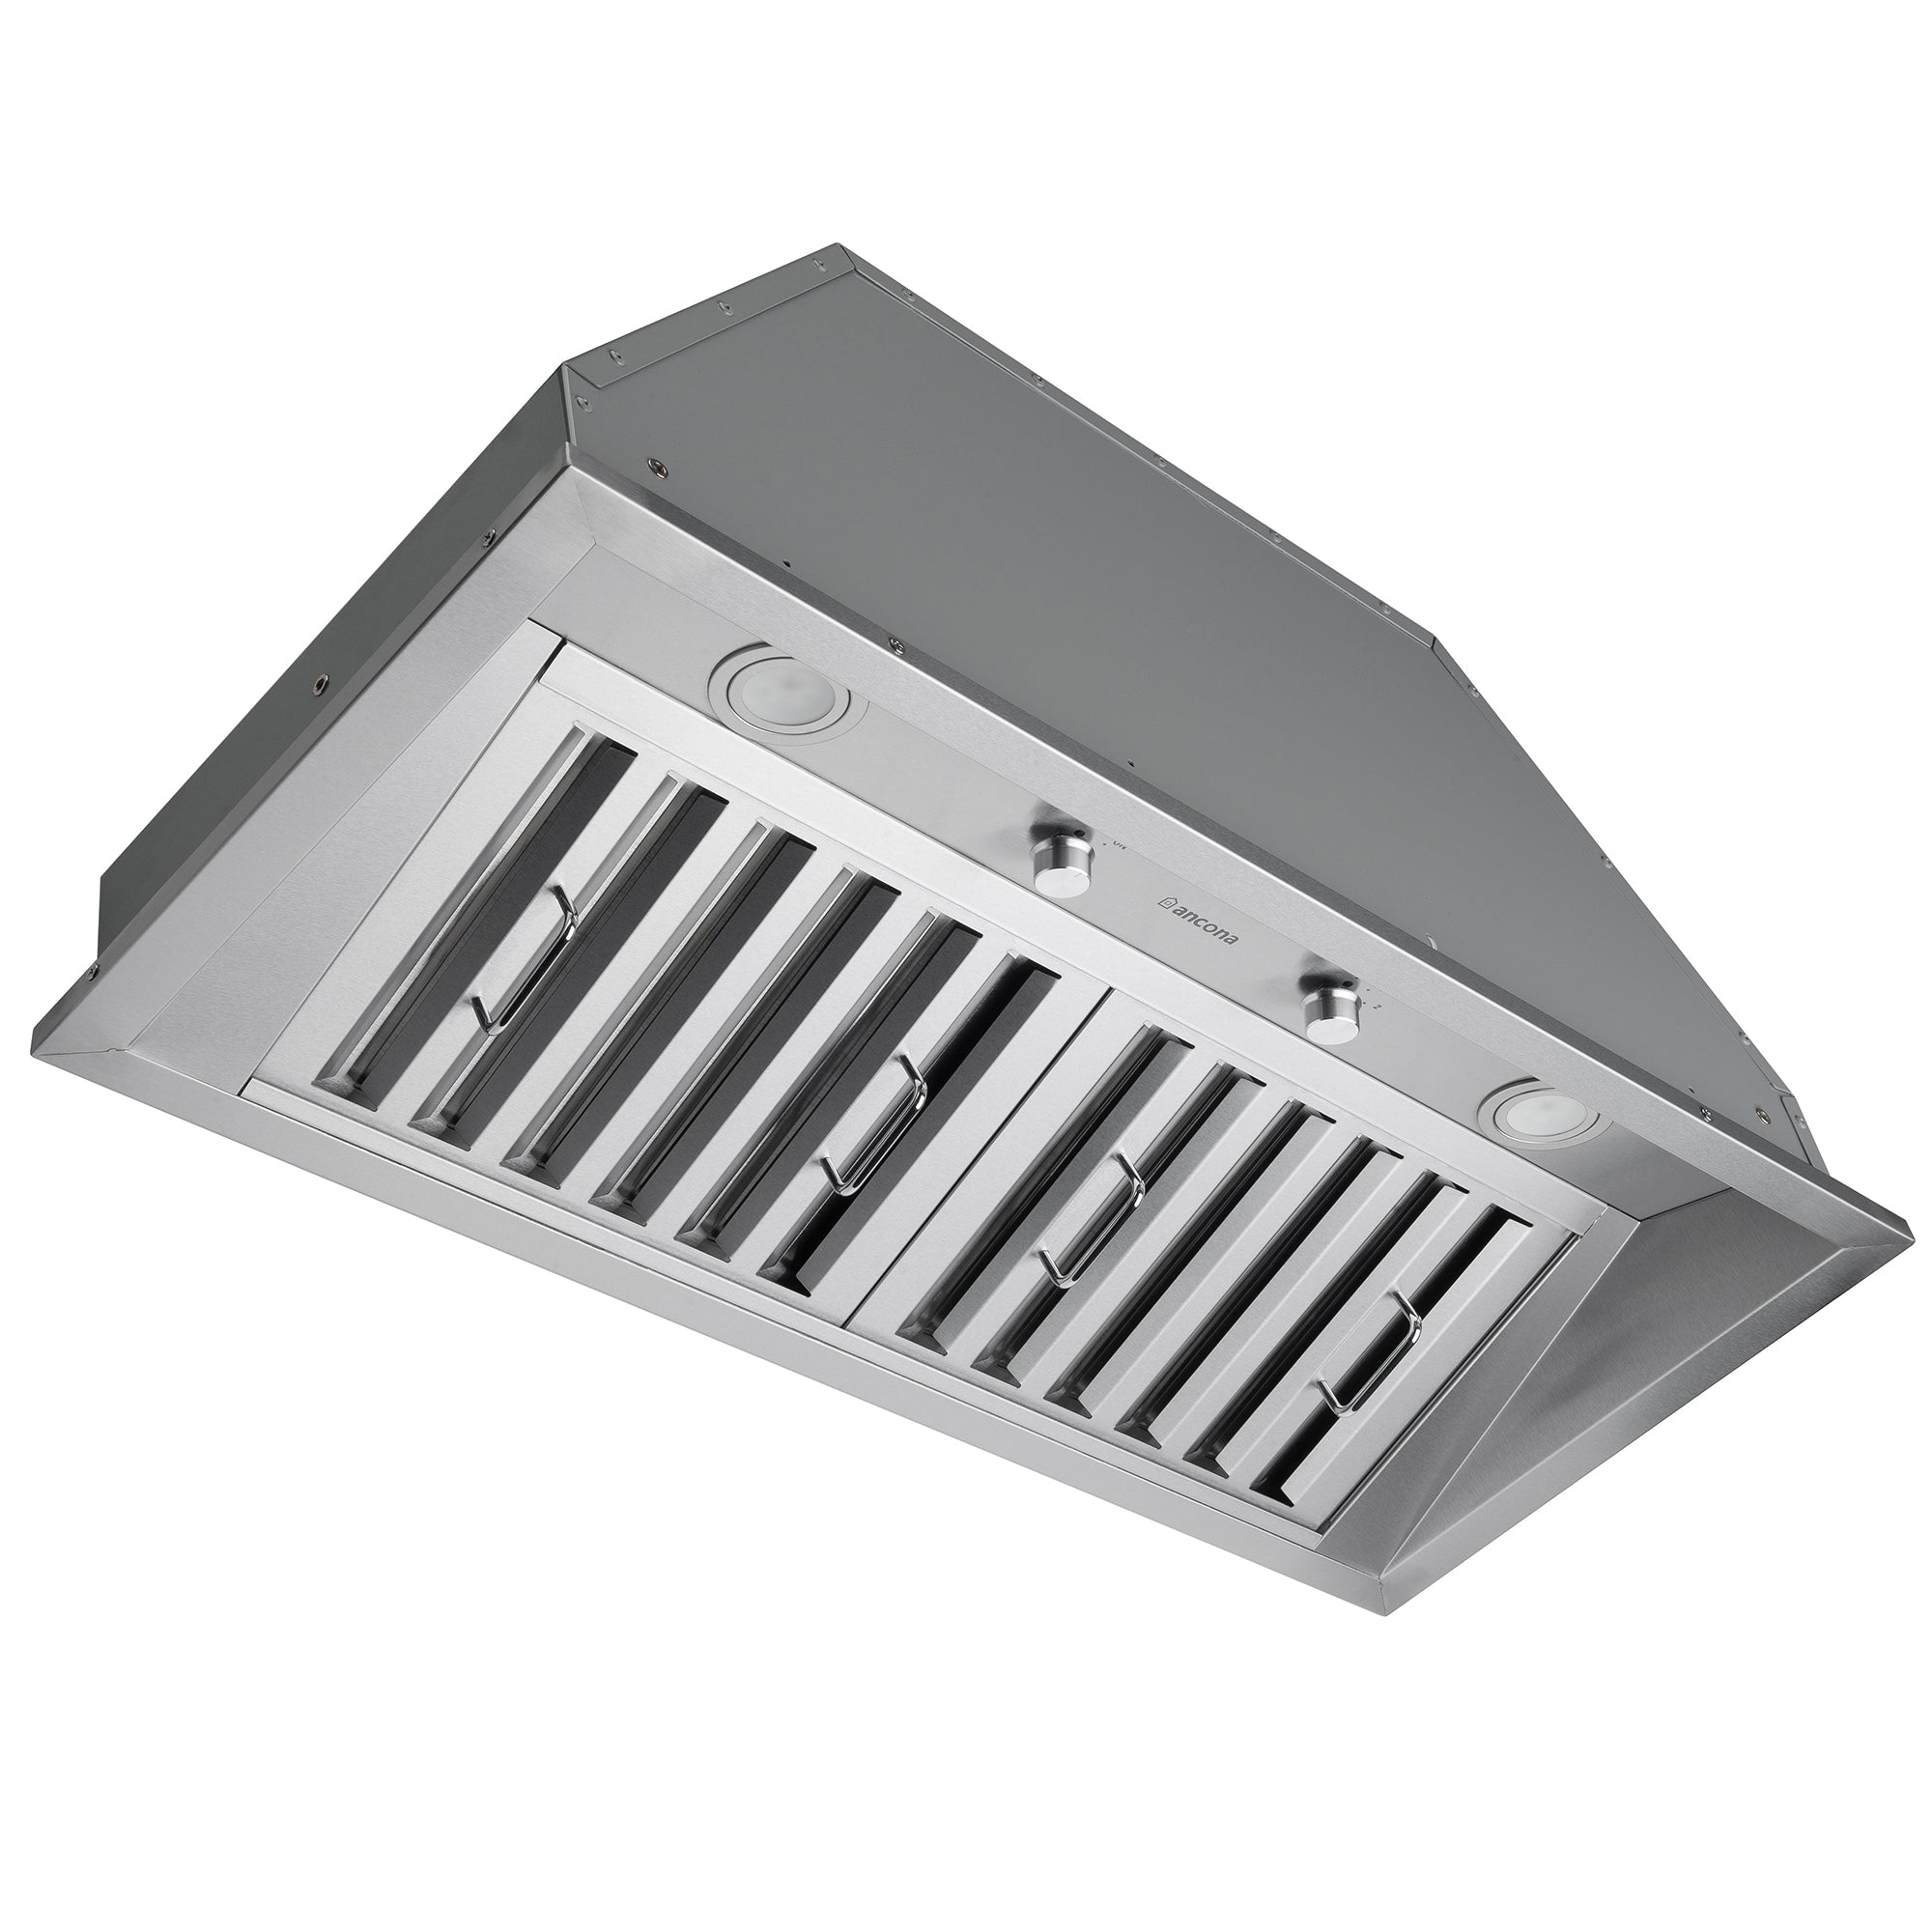 Ancona AN-1327 34 in. Pro  600 CFM Stainless Steel Ducted Insert Range Hood